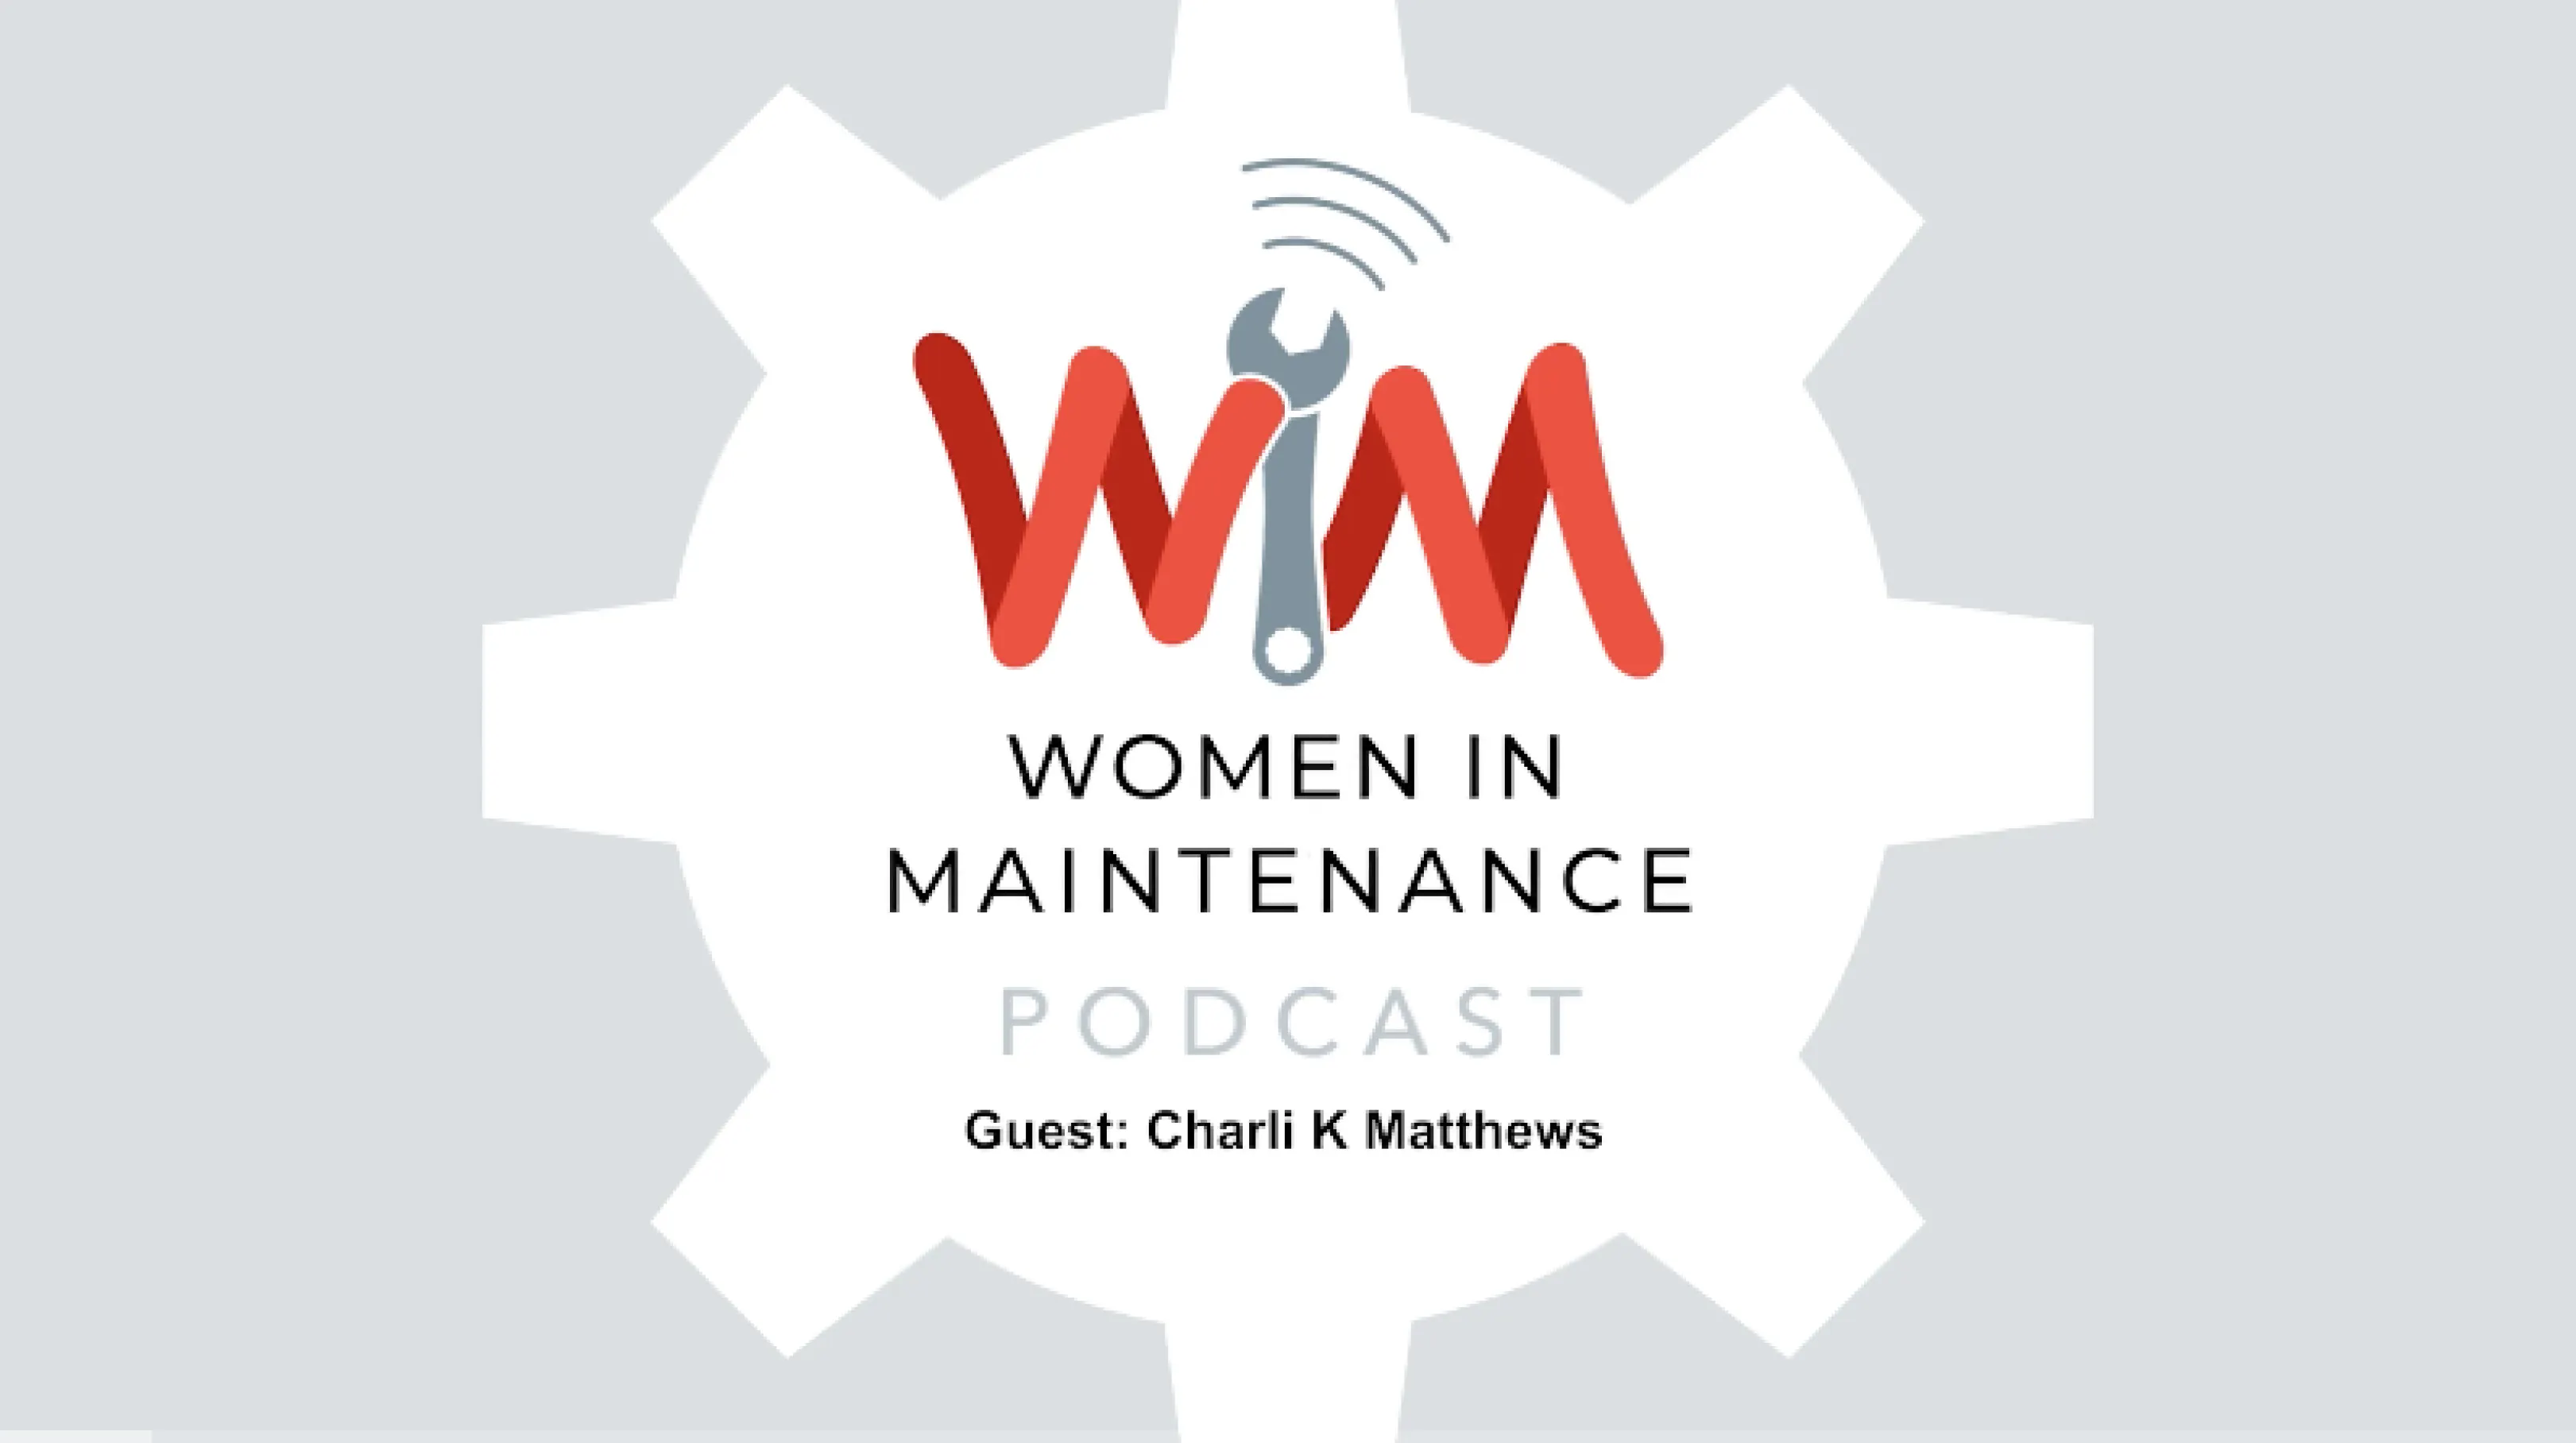 S1:E3 Women in Maintenance Podcast: Diversifying your Network with Charli K Matthews